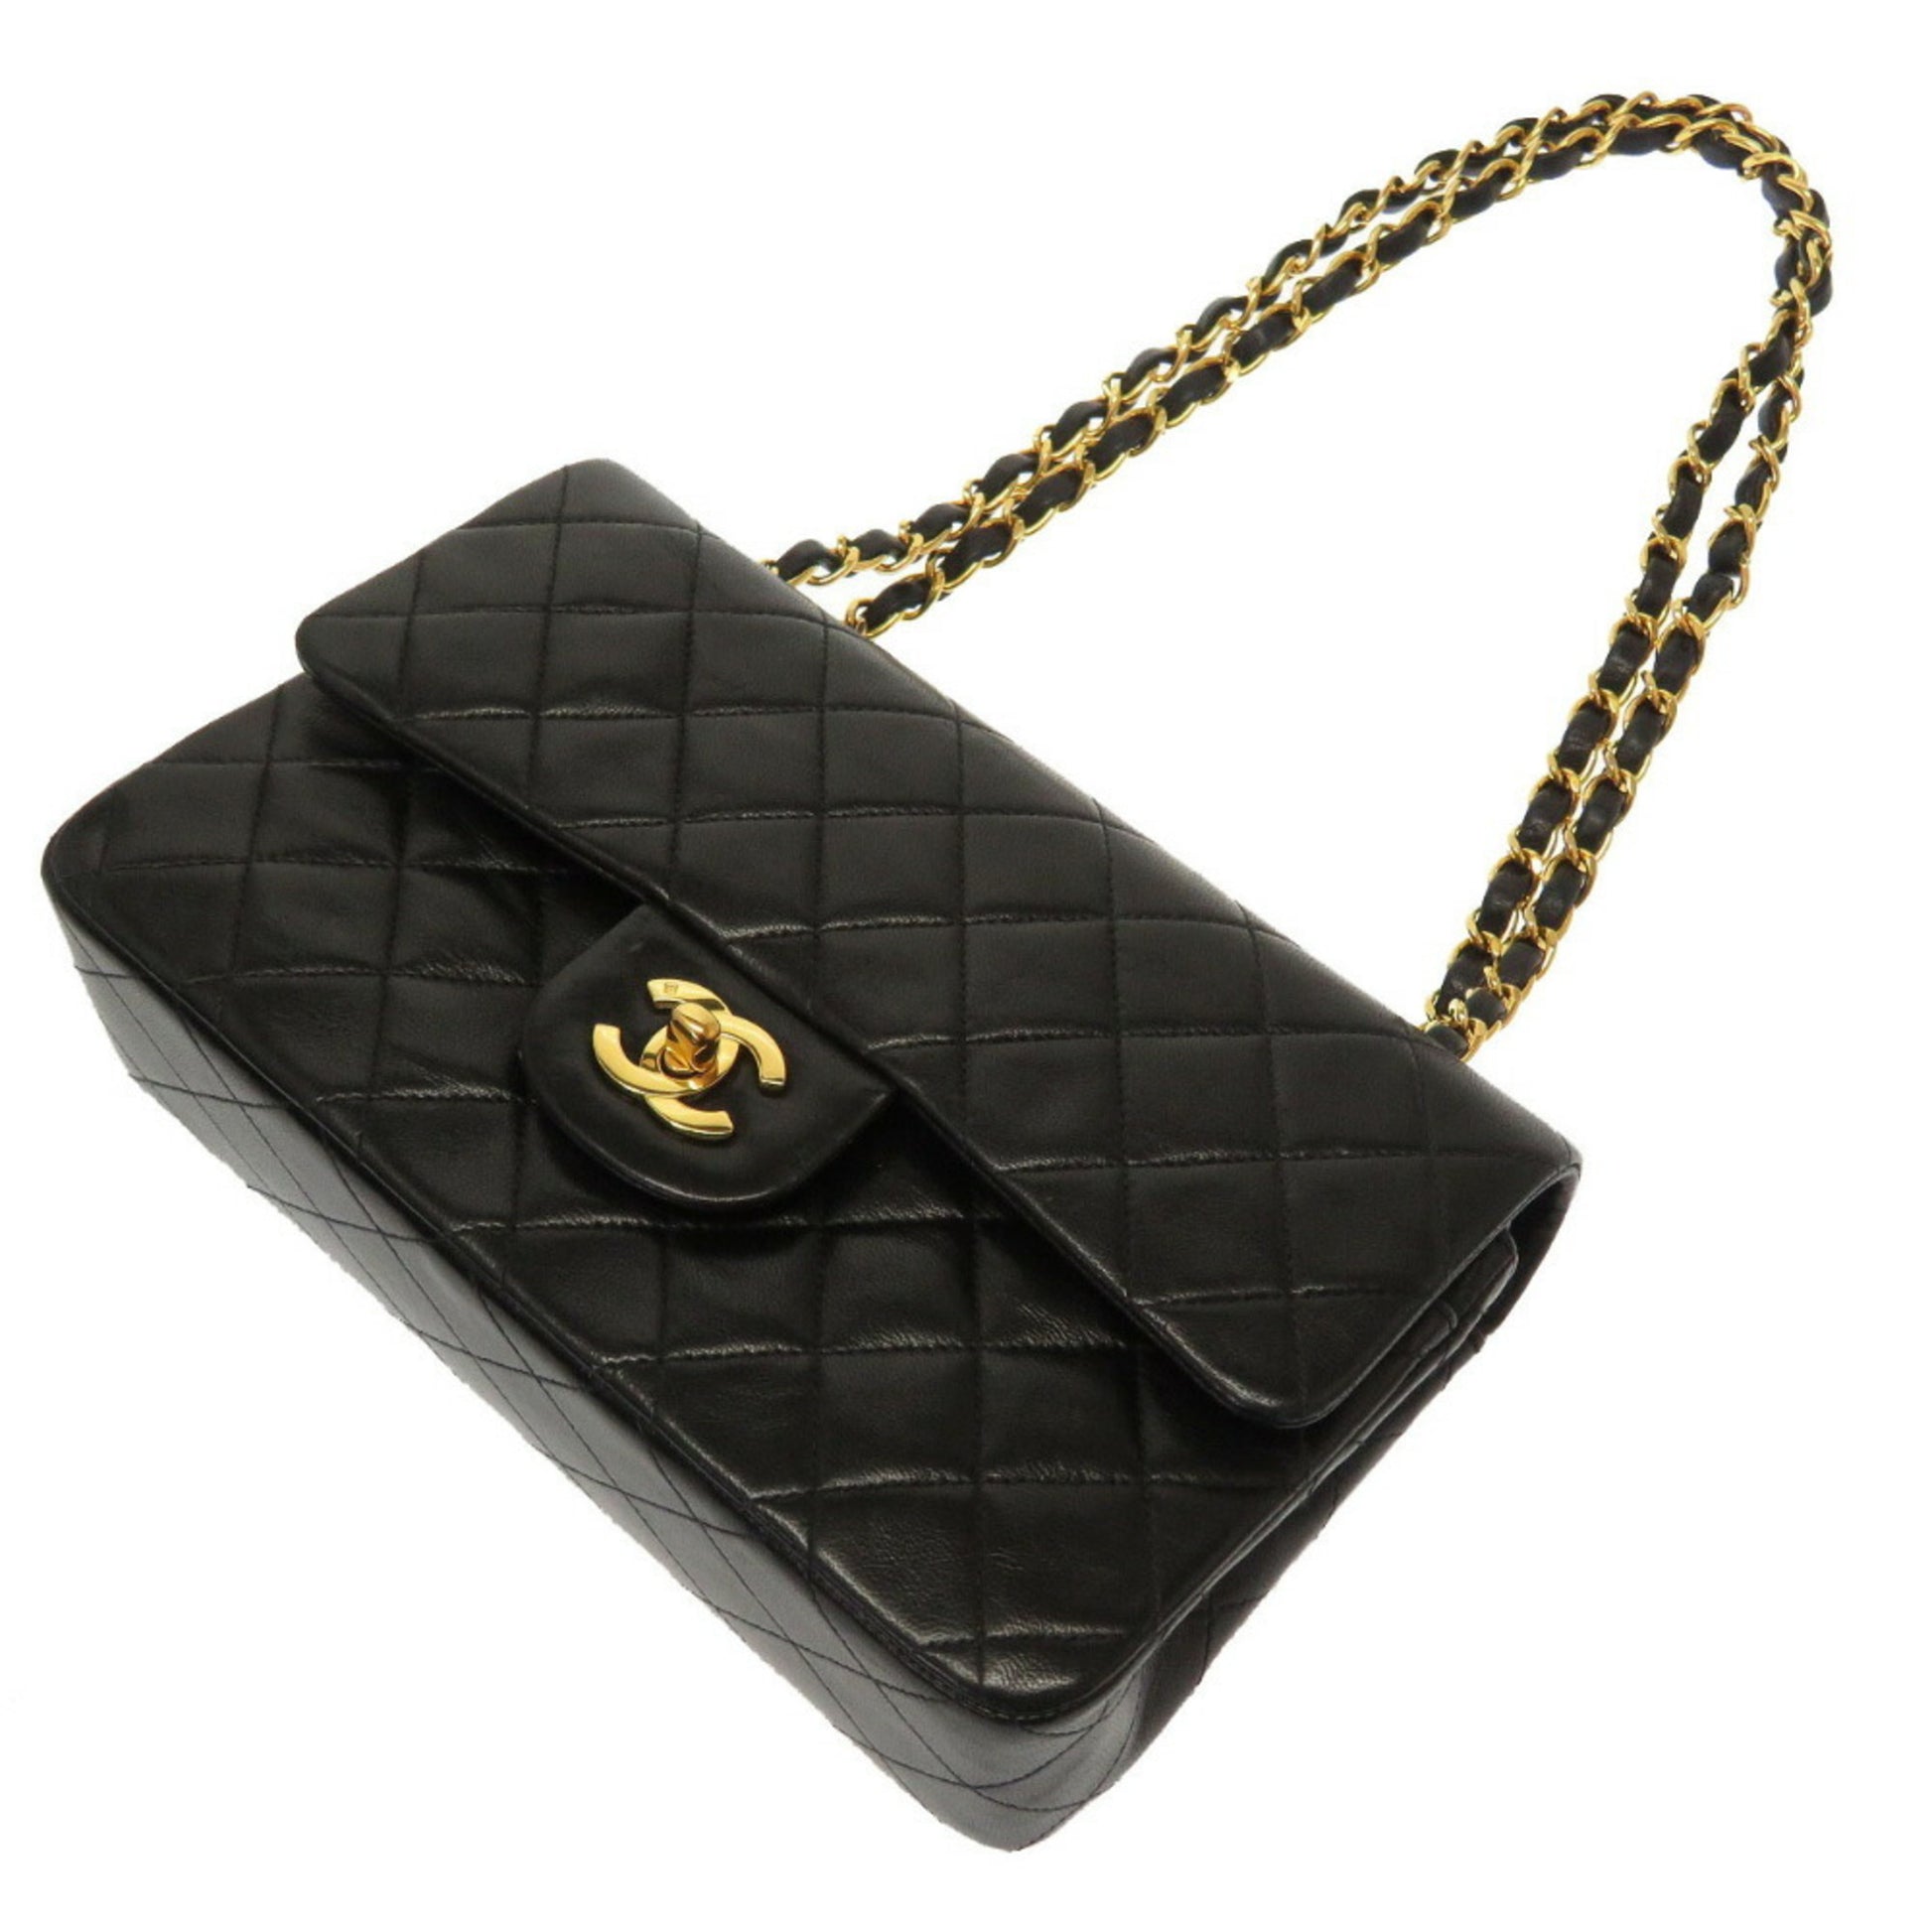 Auth CHANEL Double Flap Black Quilted Leather Gold Chain Shoulder Bag #48323